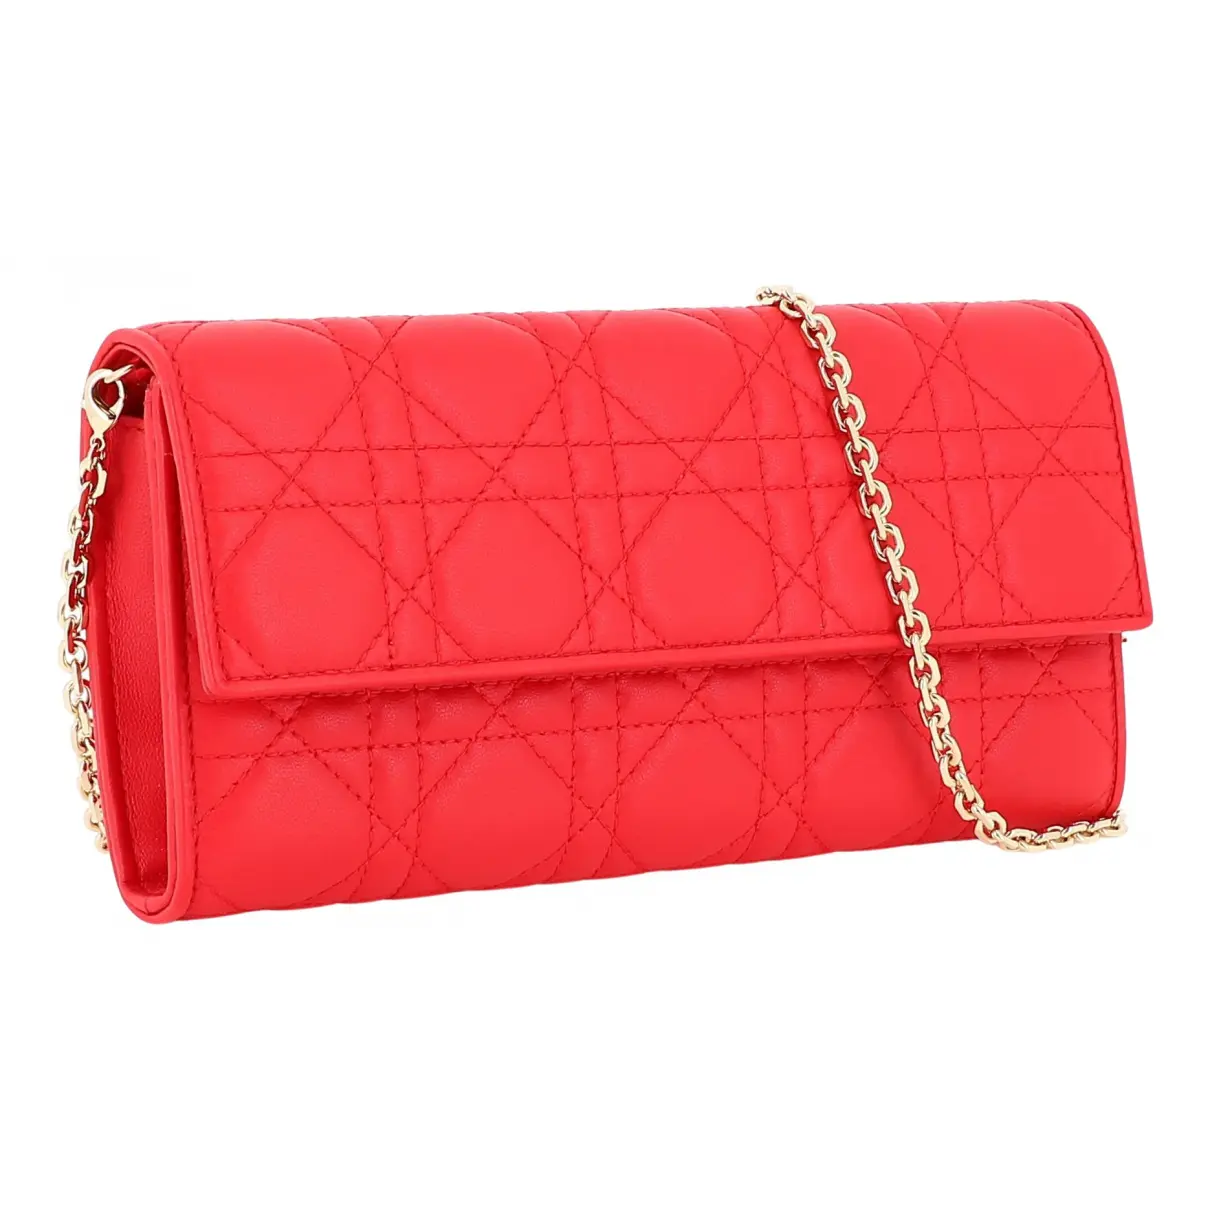 Lady Dior Wallet On Chain leather crossbody bag Dior